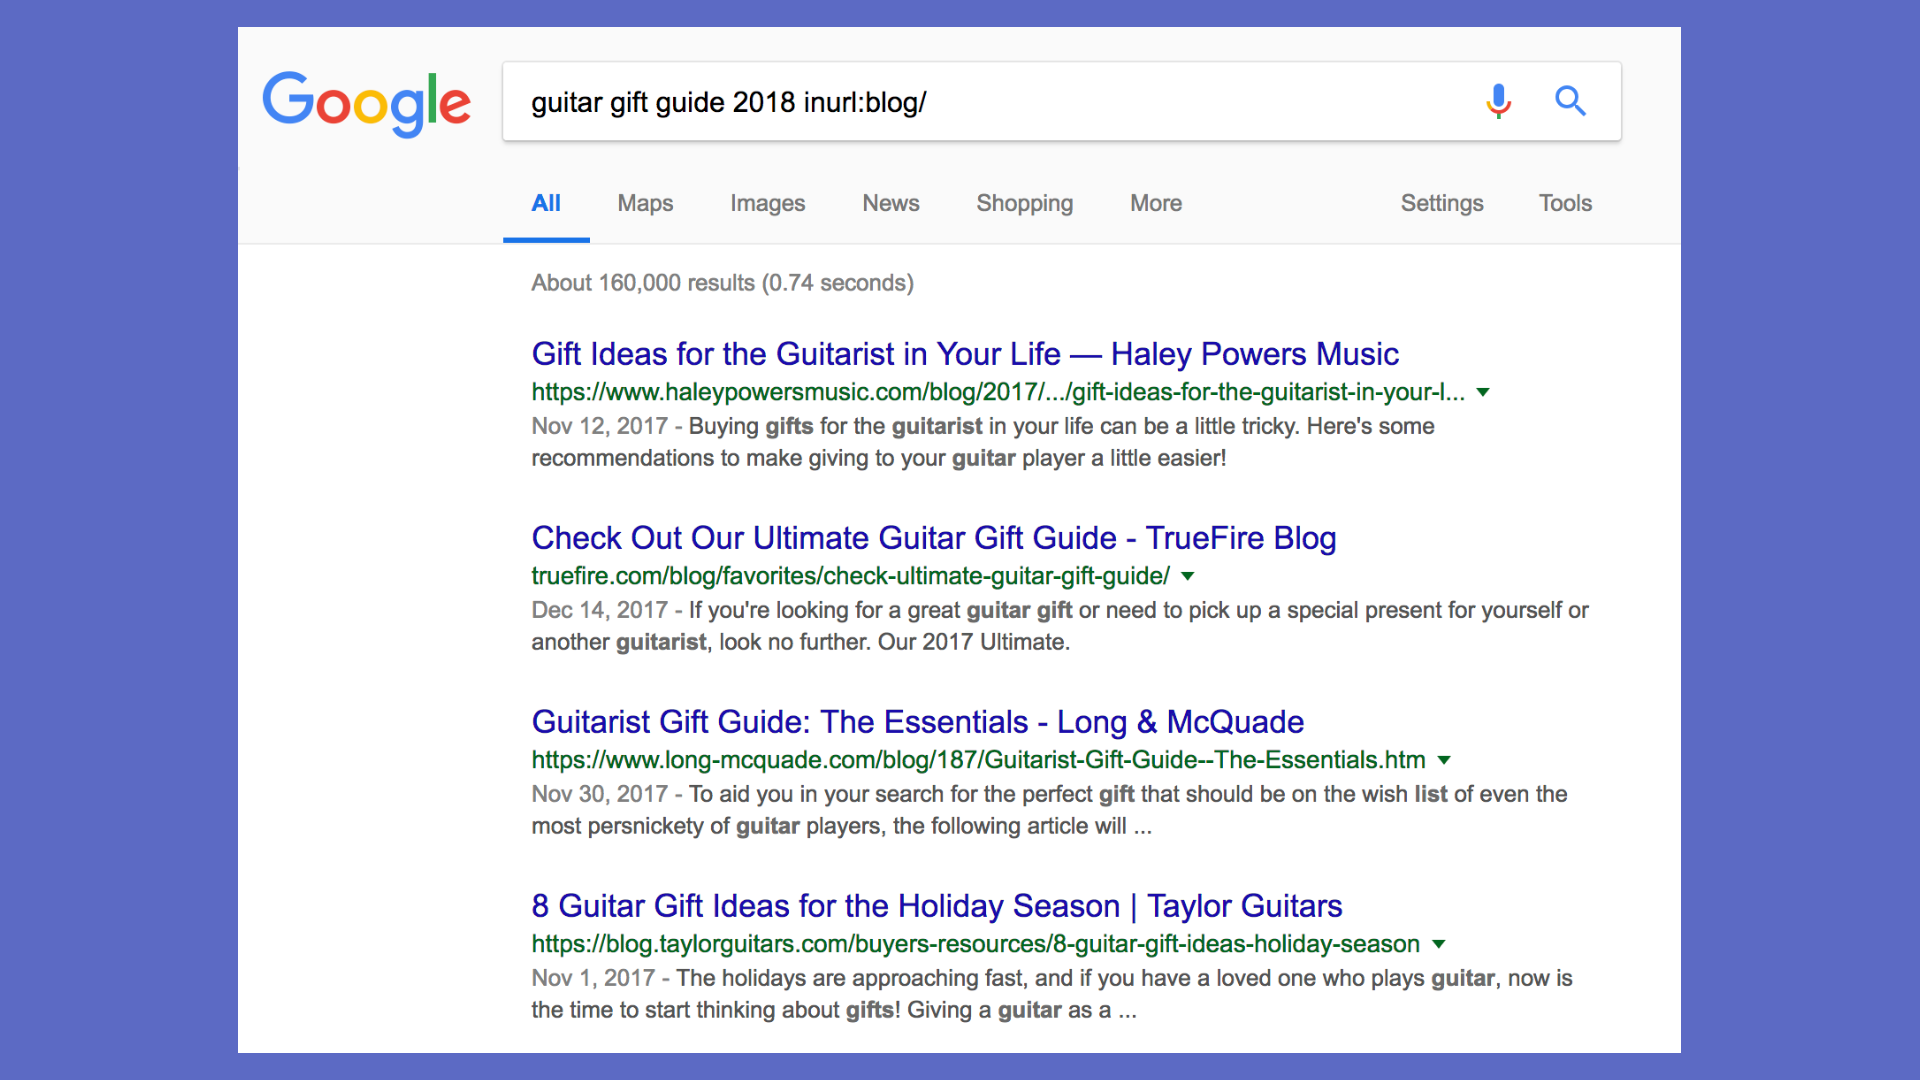 Gift guide in search results.